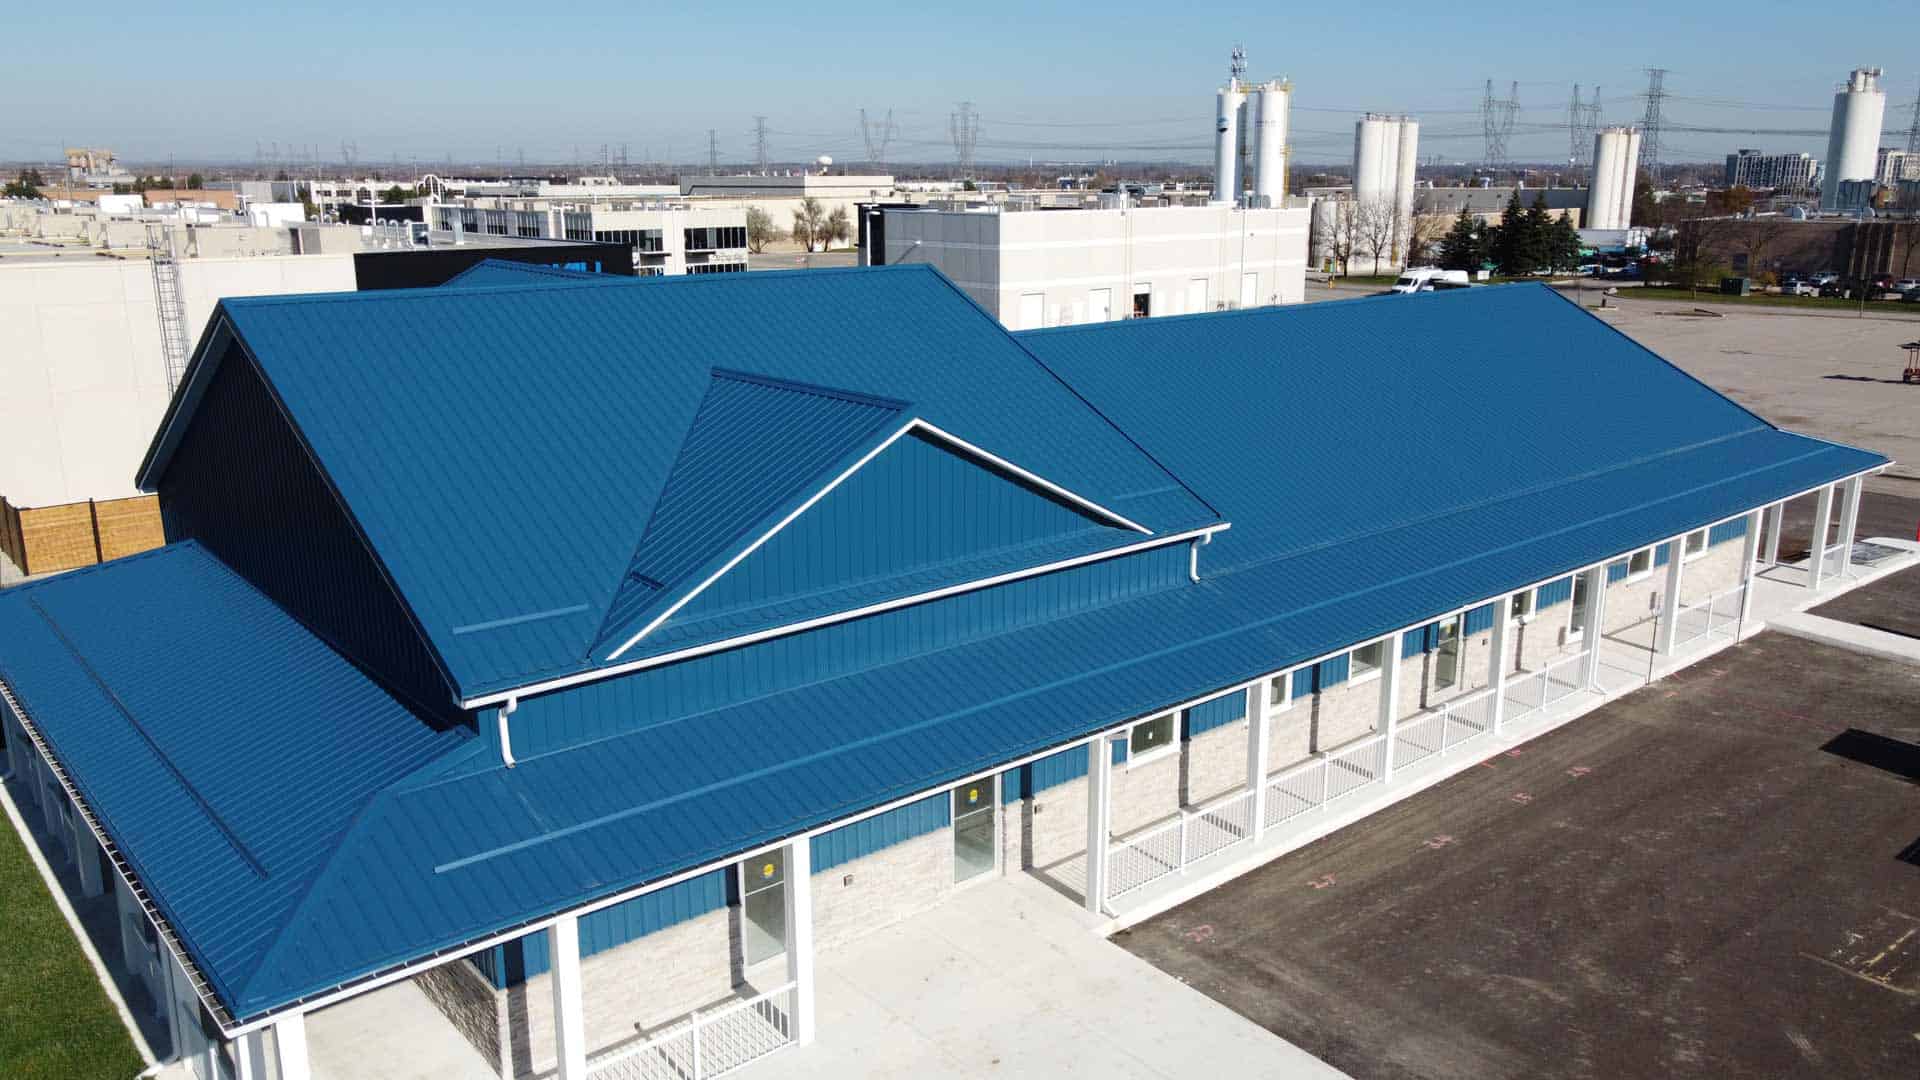 Commercial Roofing 